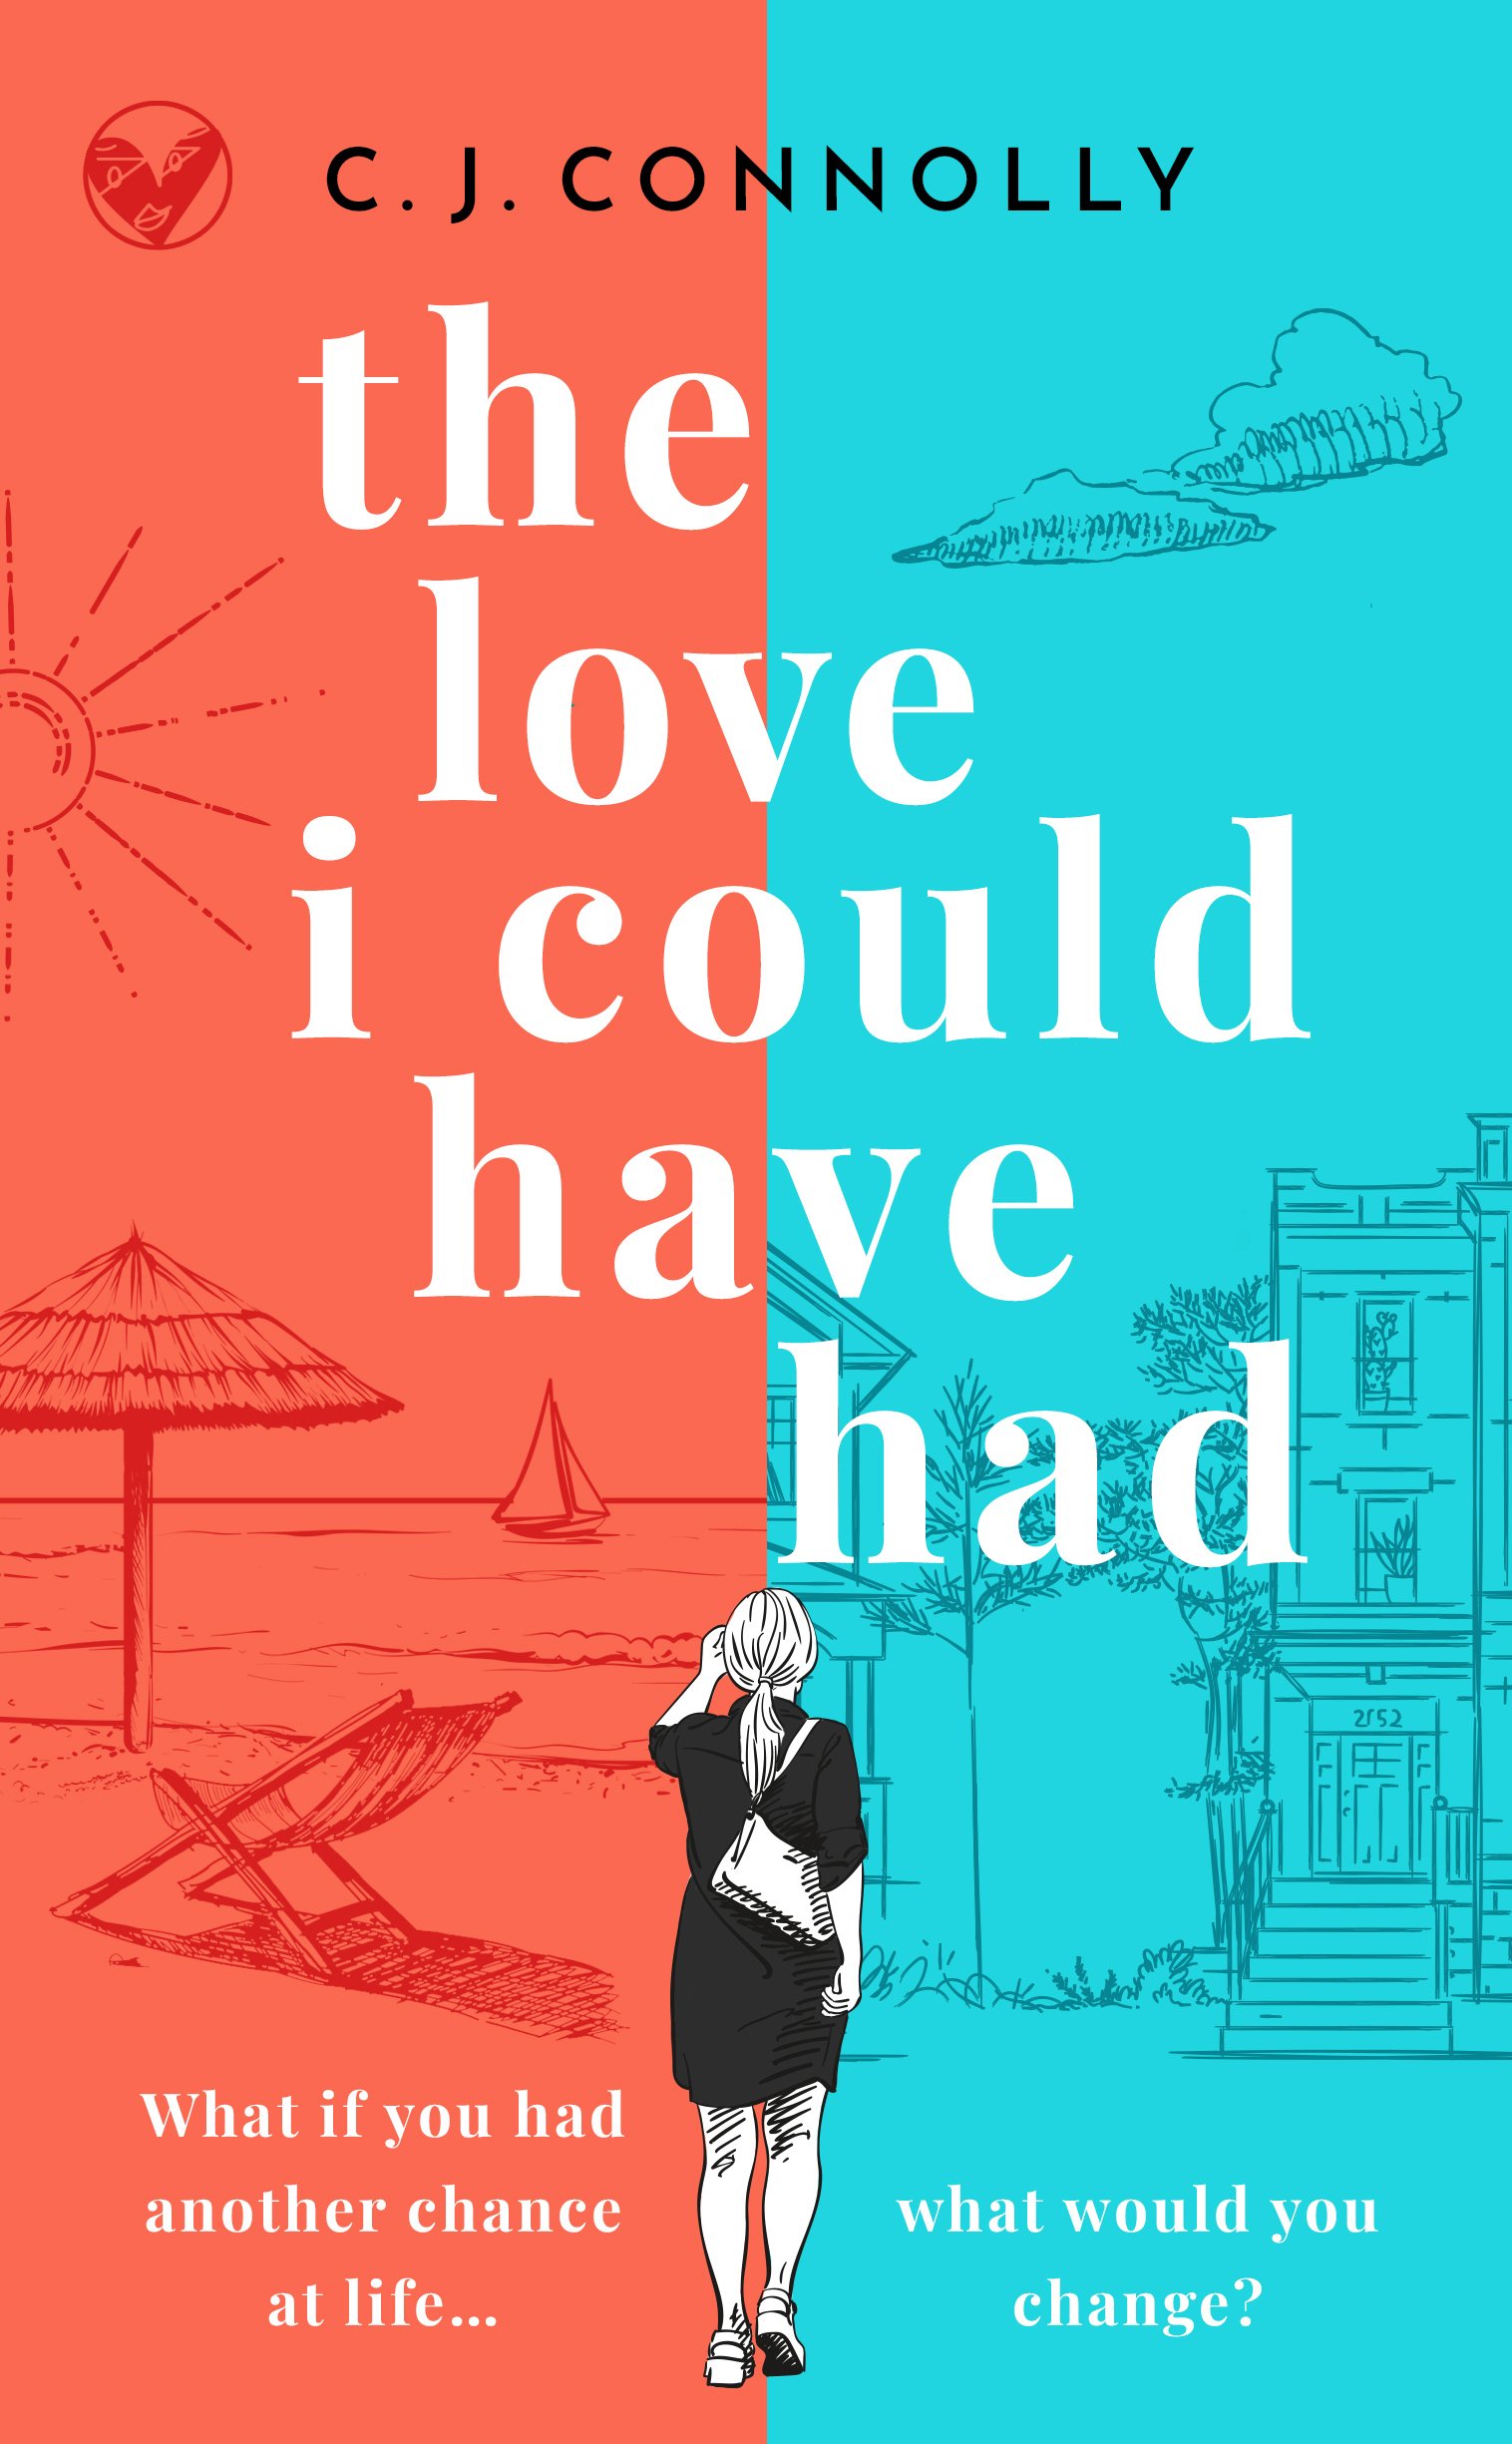 THE LOVE I COULD HAVE HAD cover publish.jpg